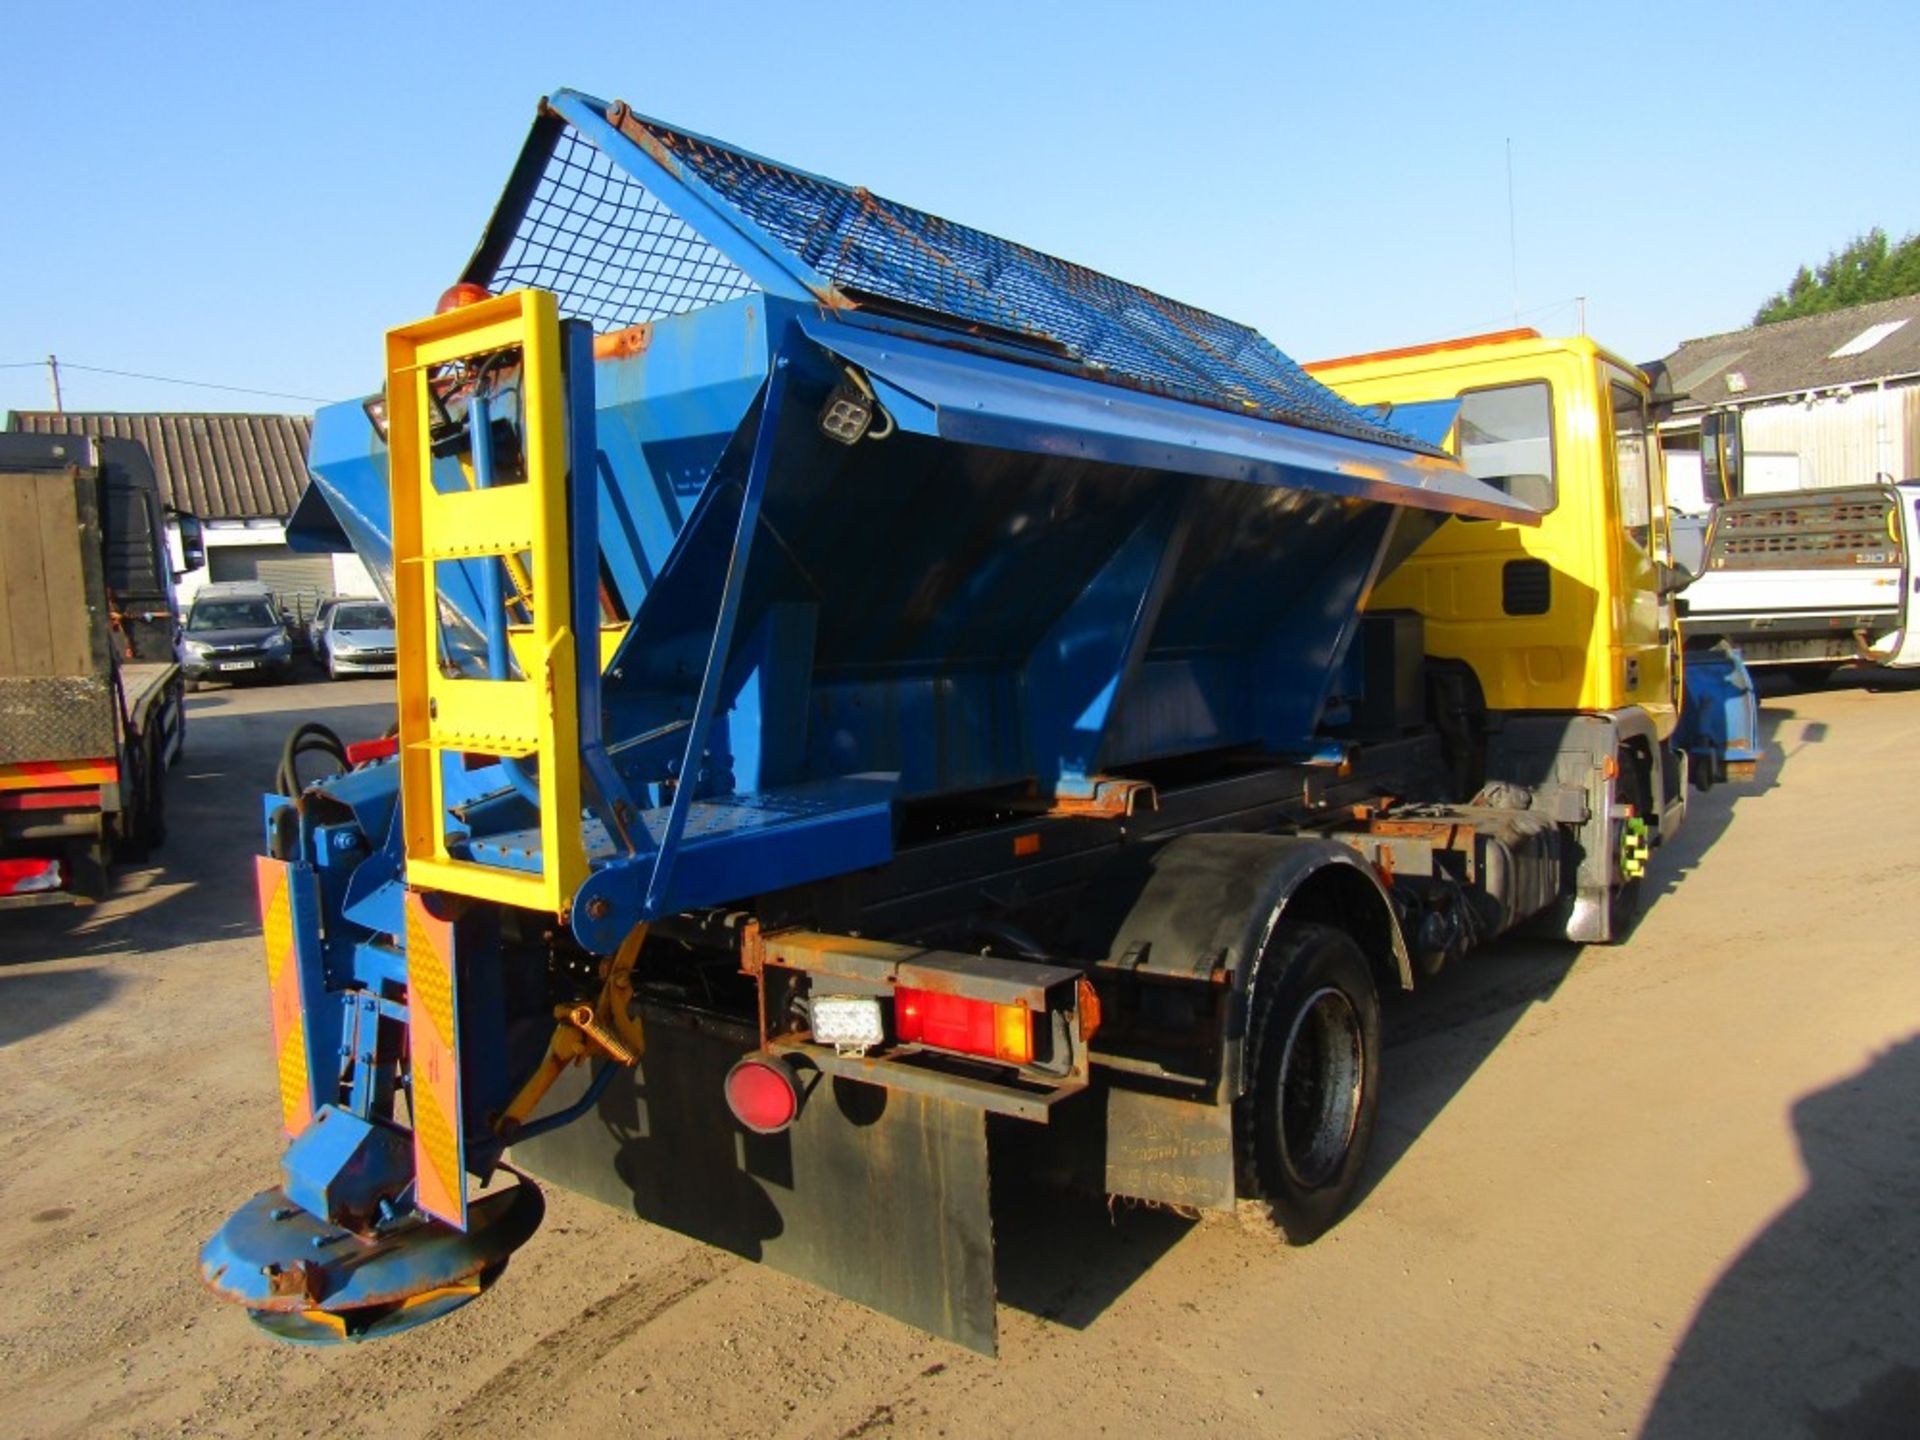 04 reg IVECO 7.5 TON ECON GRITTER C/W SNOW PLOUGH, 1ST REG 03/04, 164643KM NOT WARRANTED, V5 HERE, 4 - Image 4 of 6